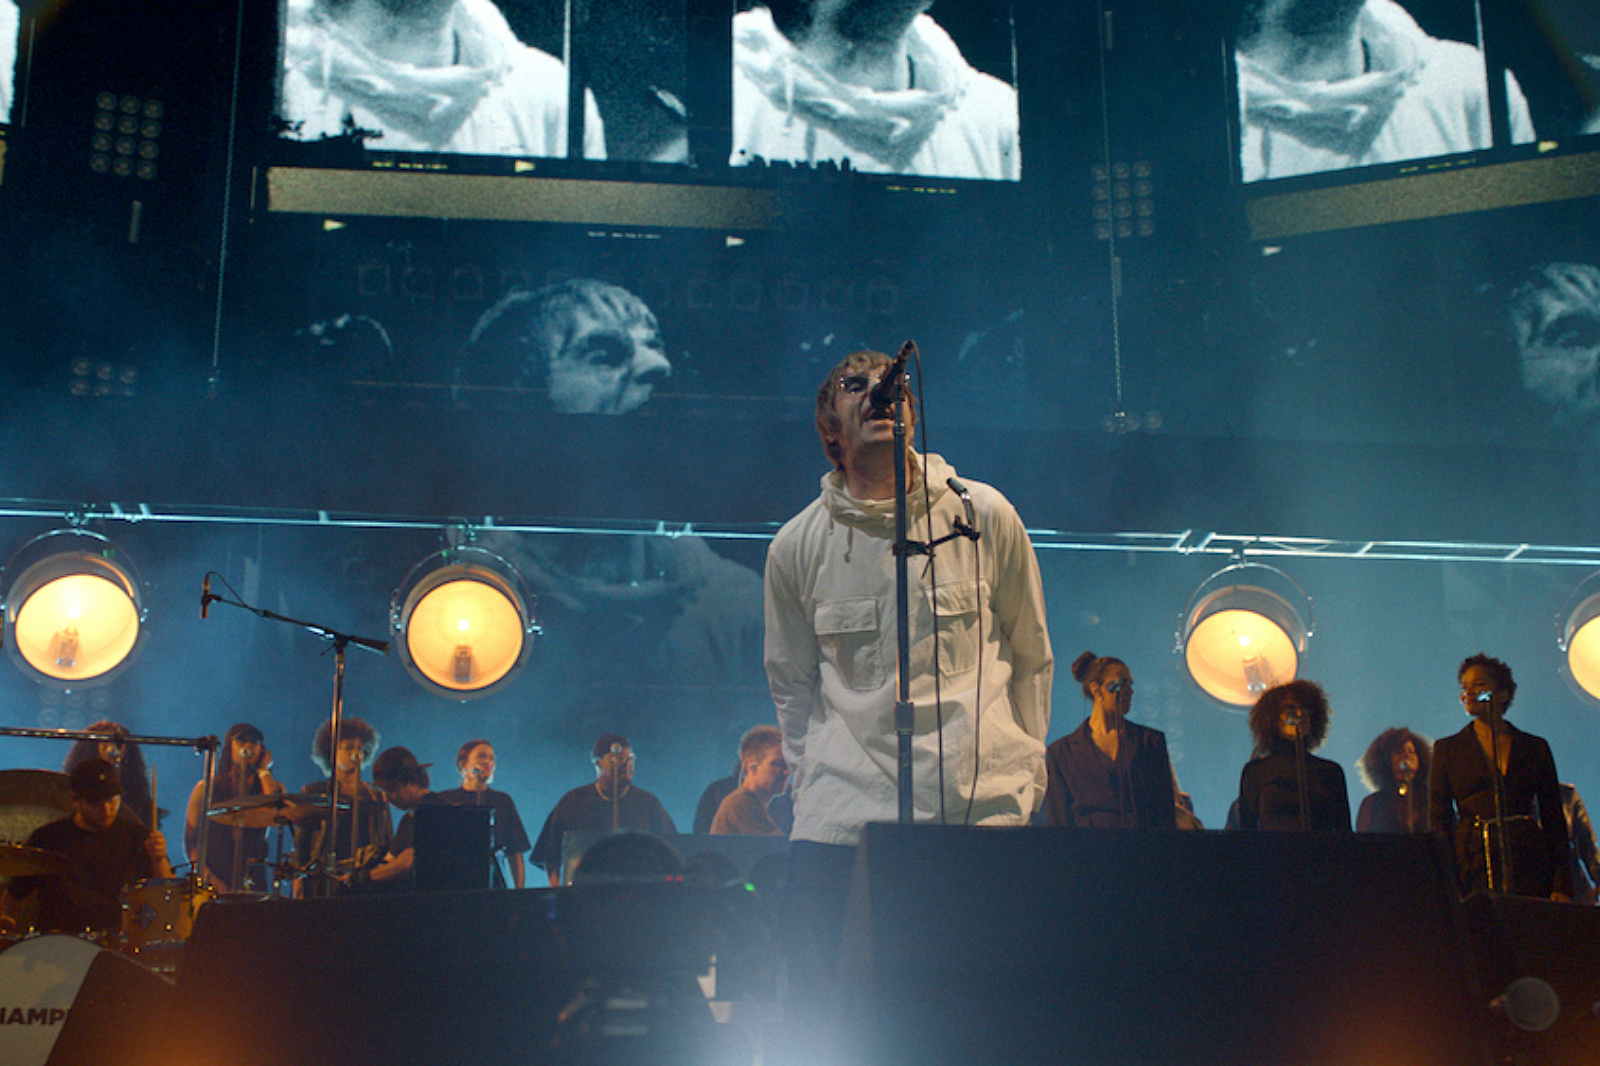 Liam Gallagher announces release of Knebworth 22 documentary